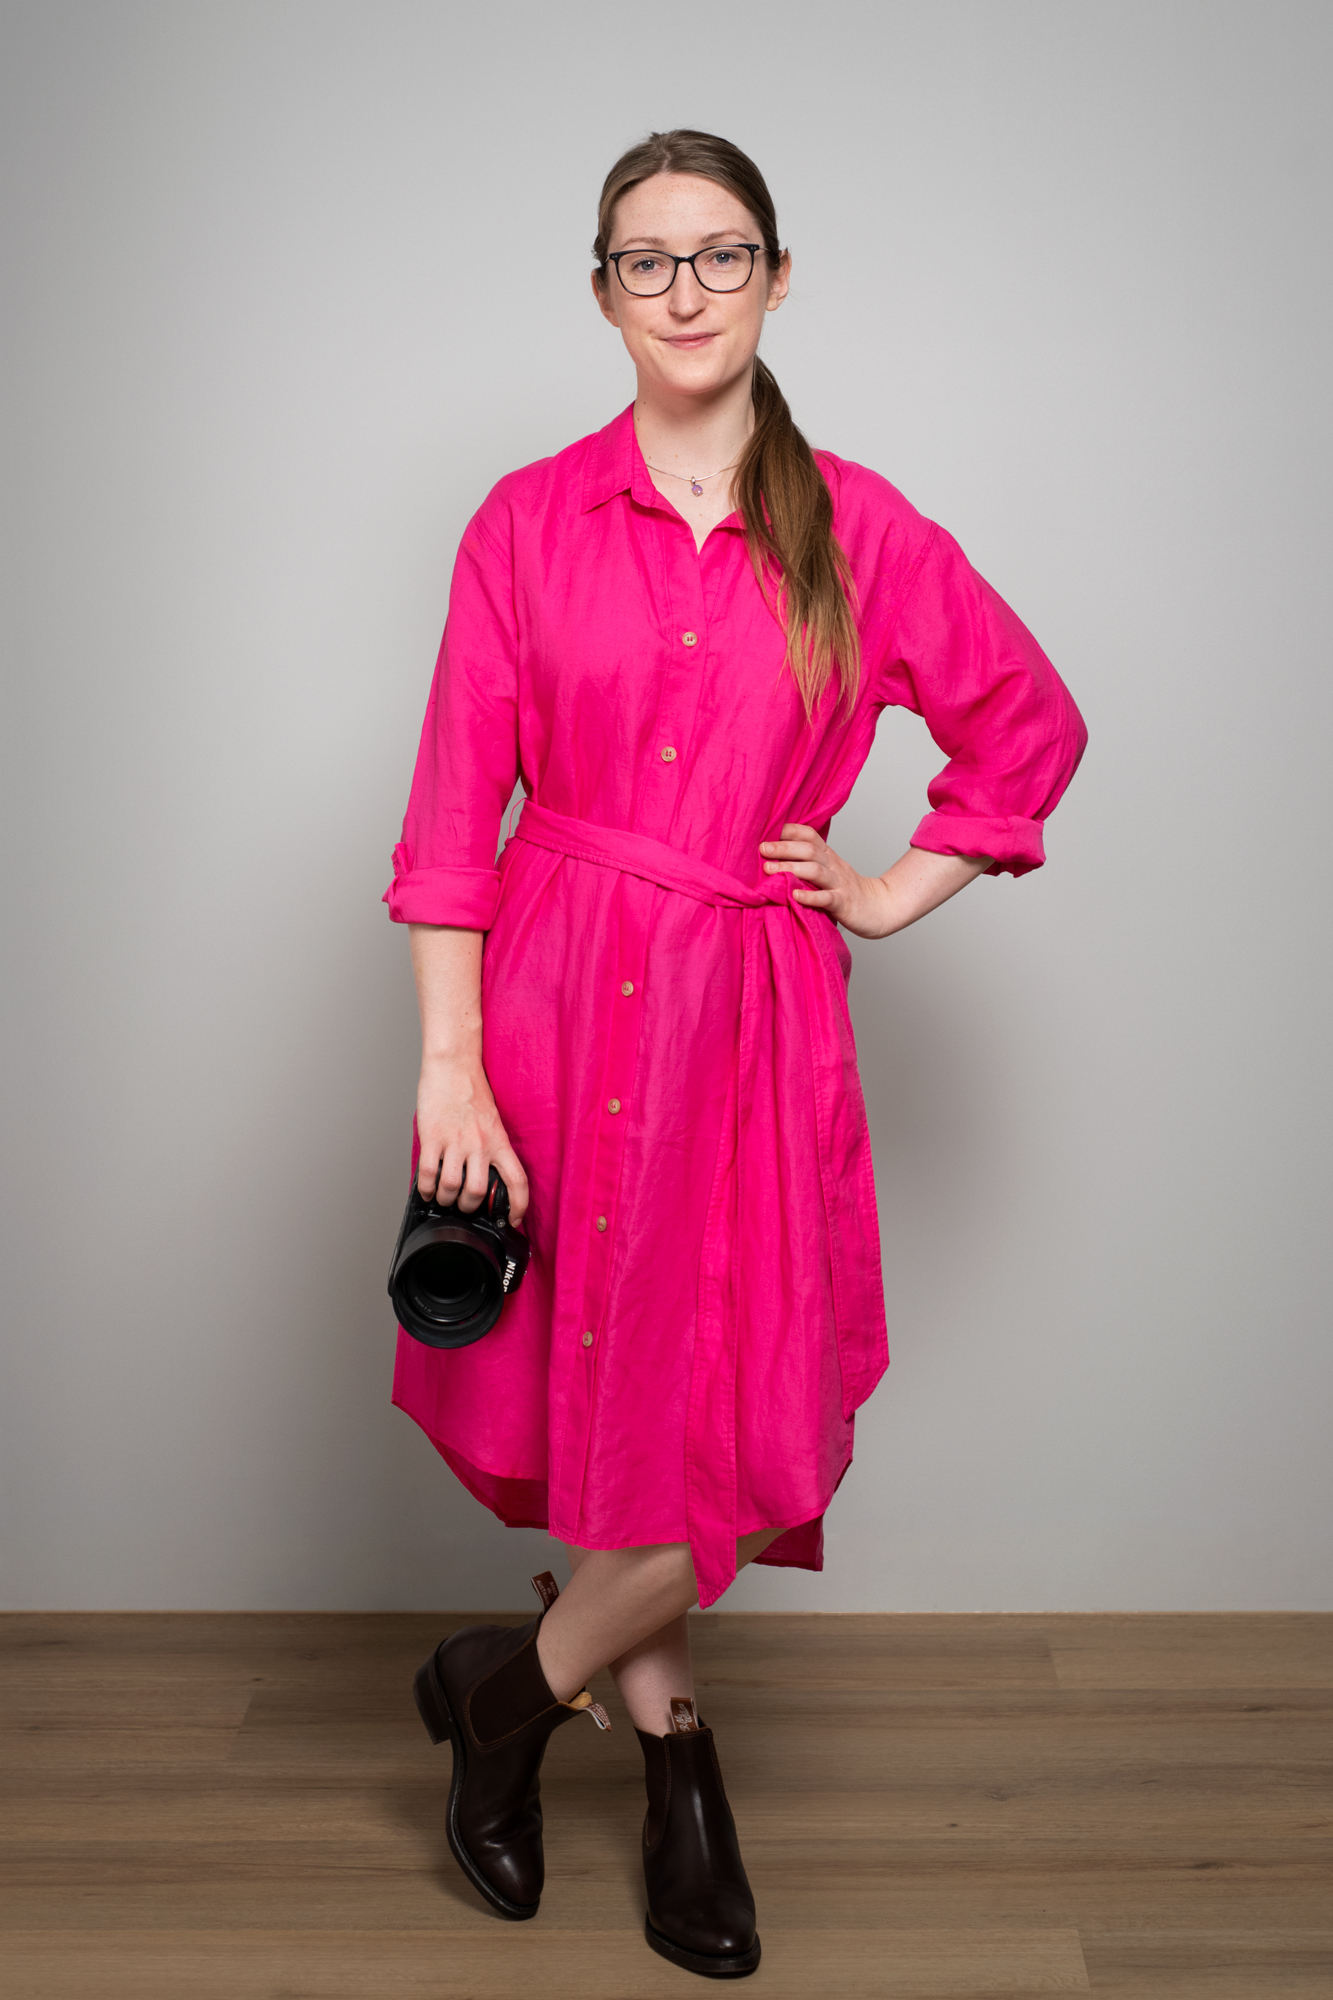 Portrait of Julia Nance wearing a bright pink dress with one hand on her hip and the other holding her camera. She smiles to camera and stands confidently.